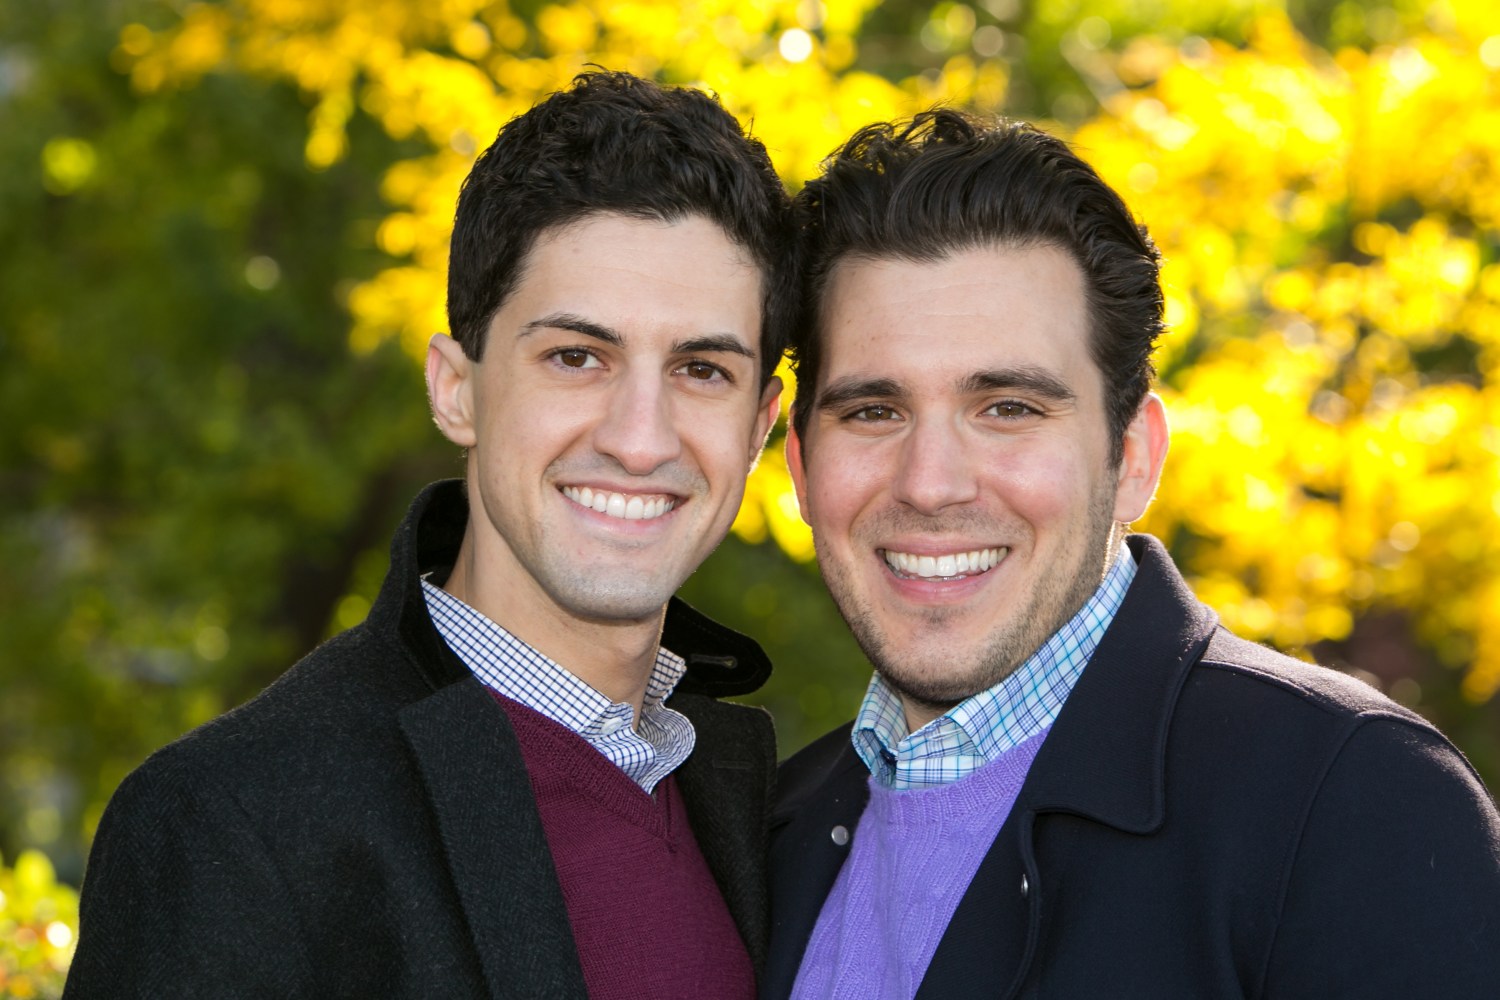 Gay couple files complaint against New York City over denying IVF coverage